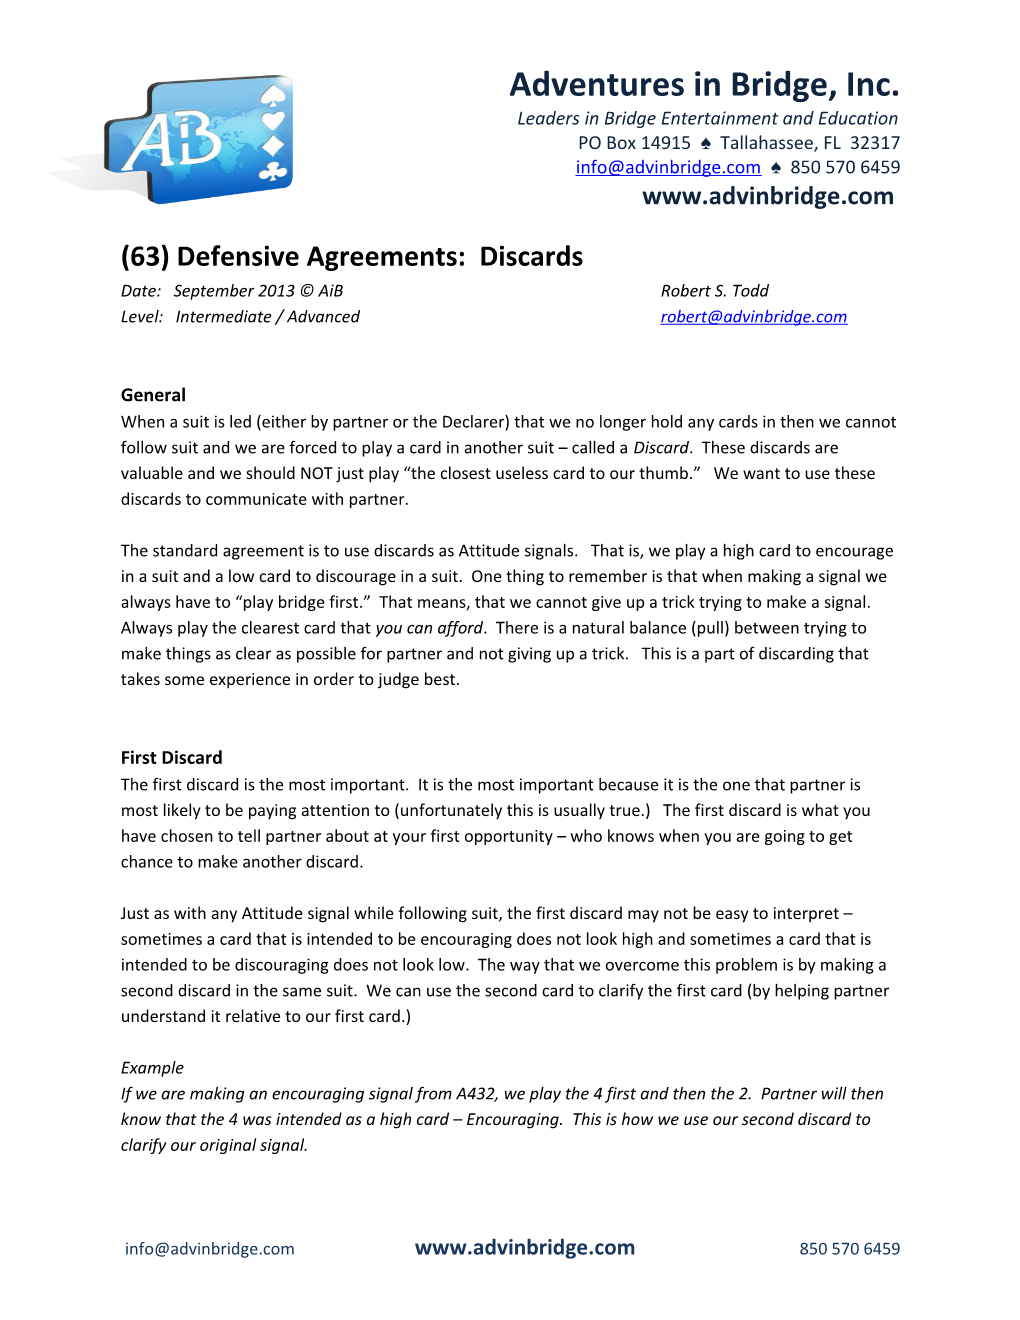 (63) Defensive Agreements: Discards